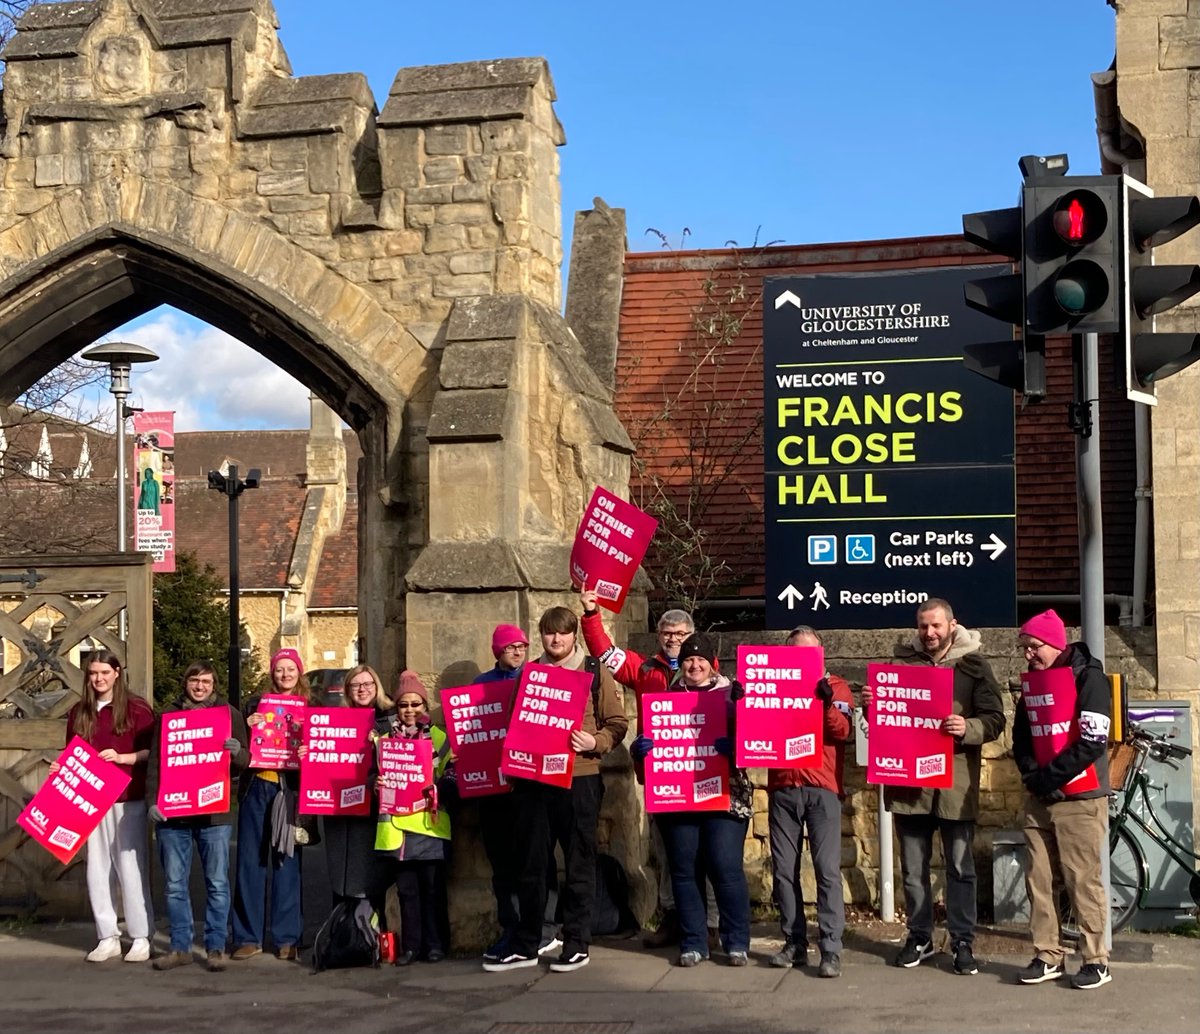 Getting the beeps in on a sunny morning in Gloucestershire #ucuRISING @ucuglos @ucu